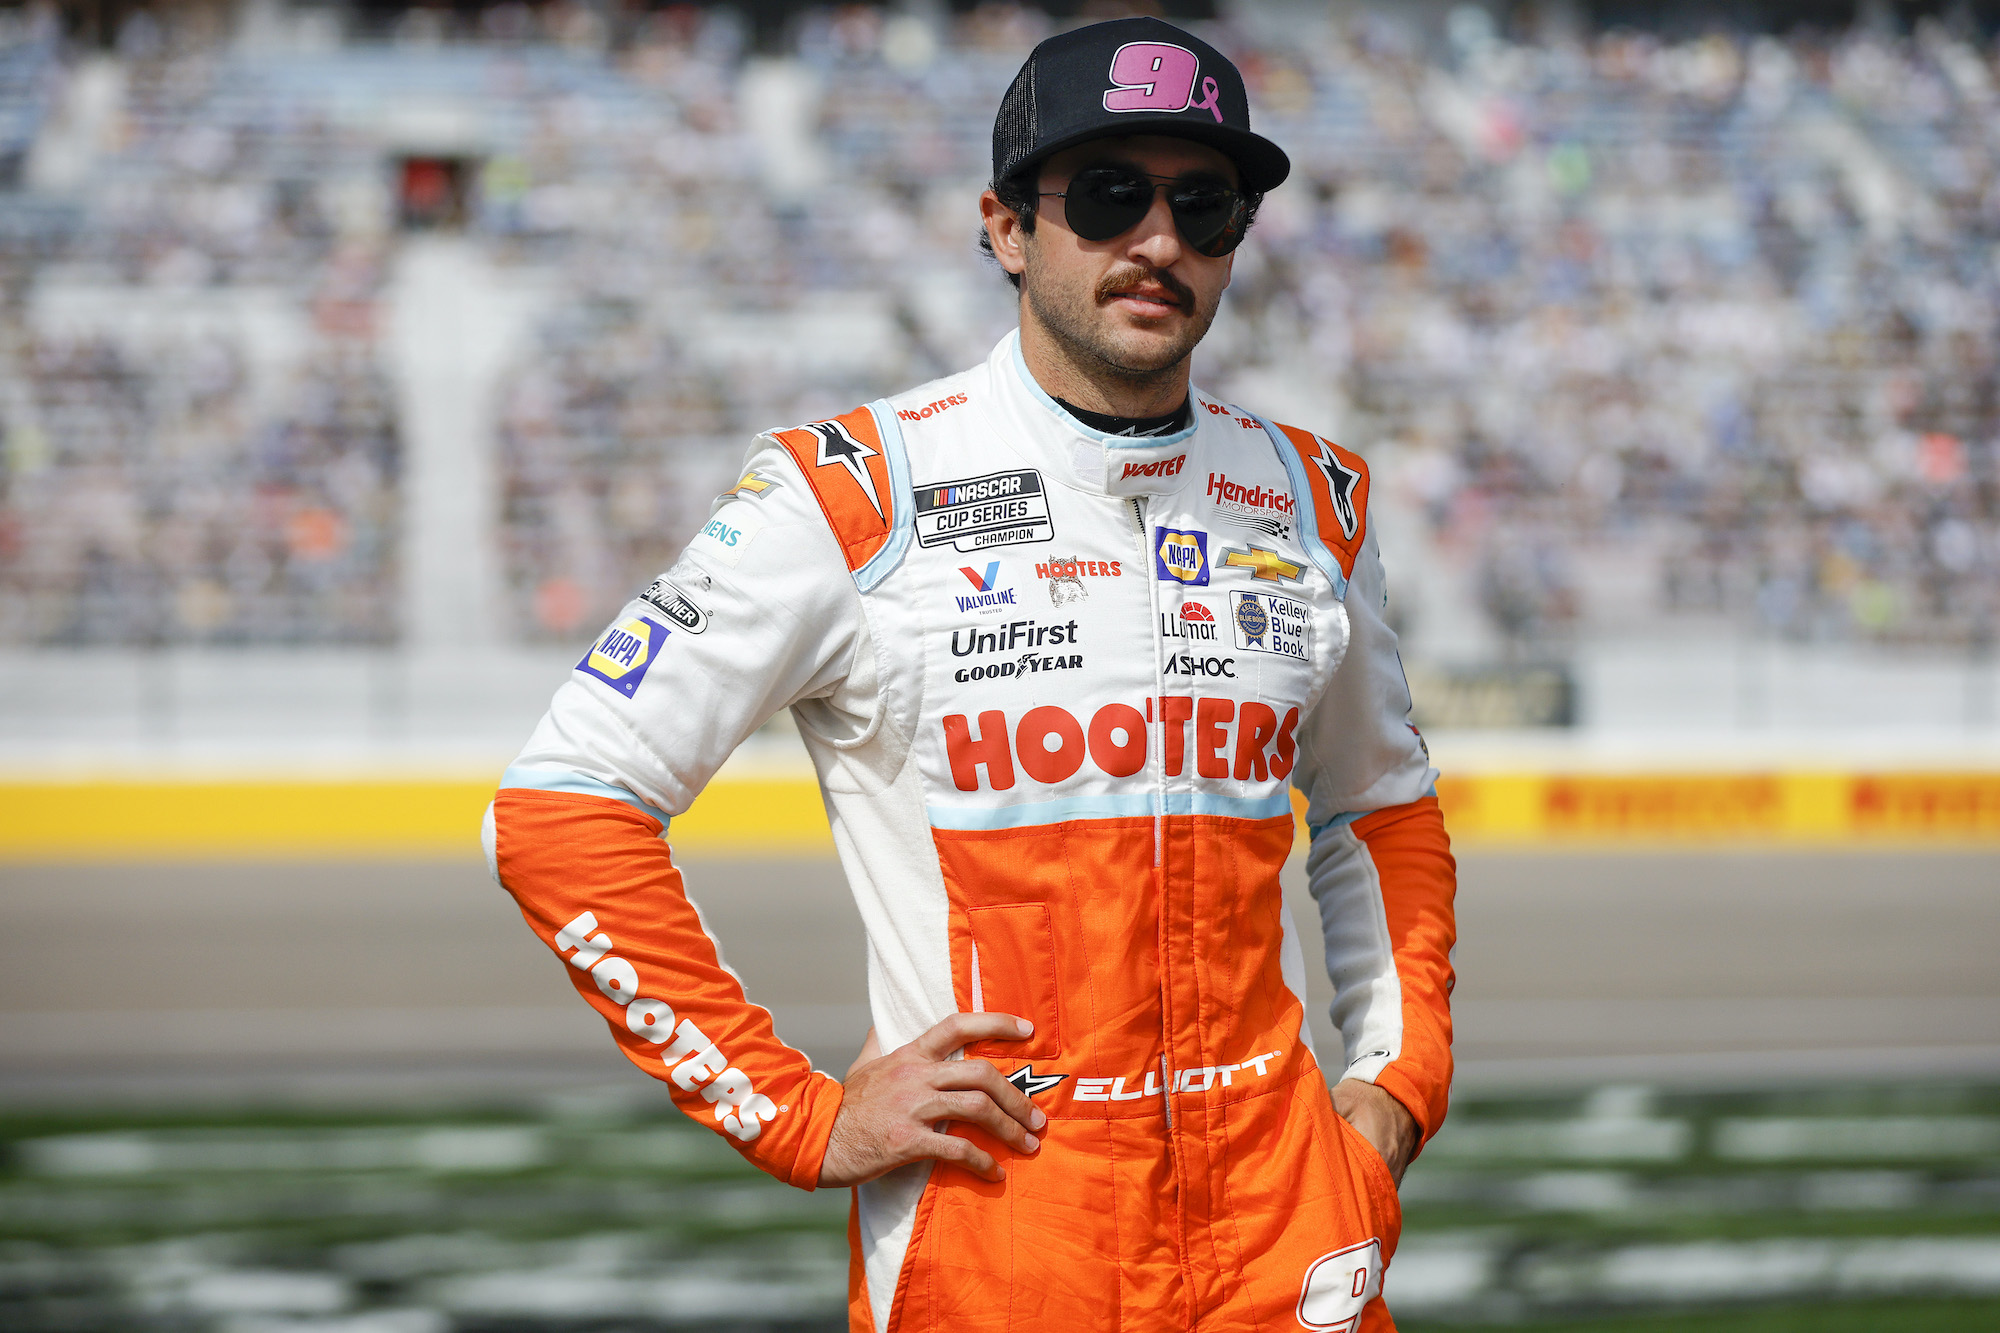 Chase Elliott Candidly Admits Mistake After Pushing Camera: 'Not a Wise Move'